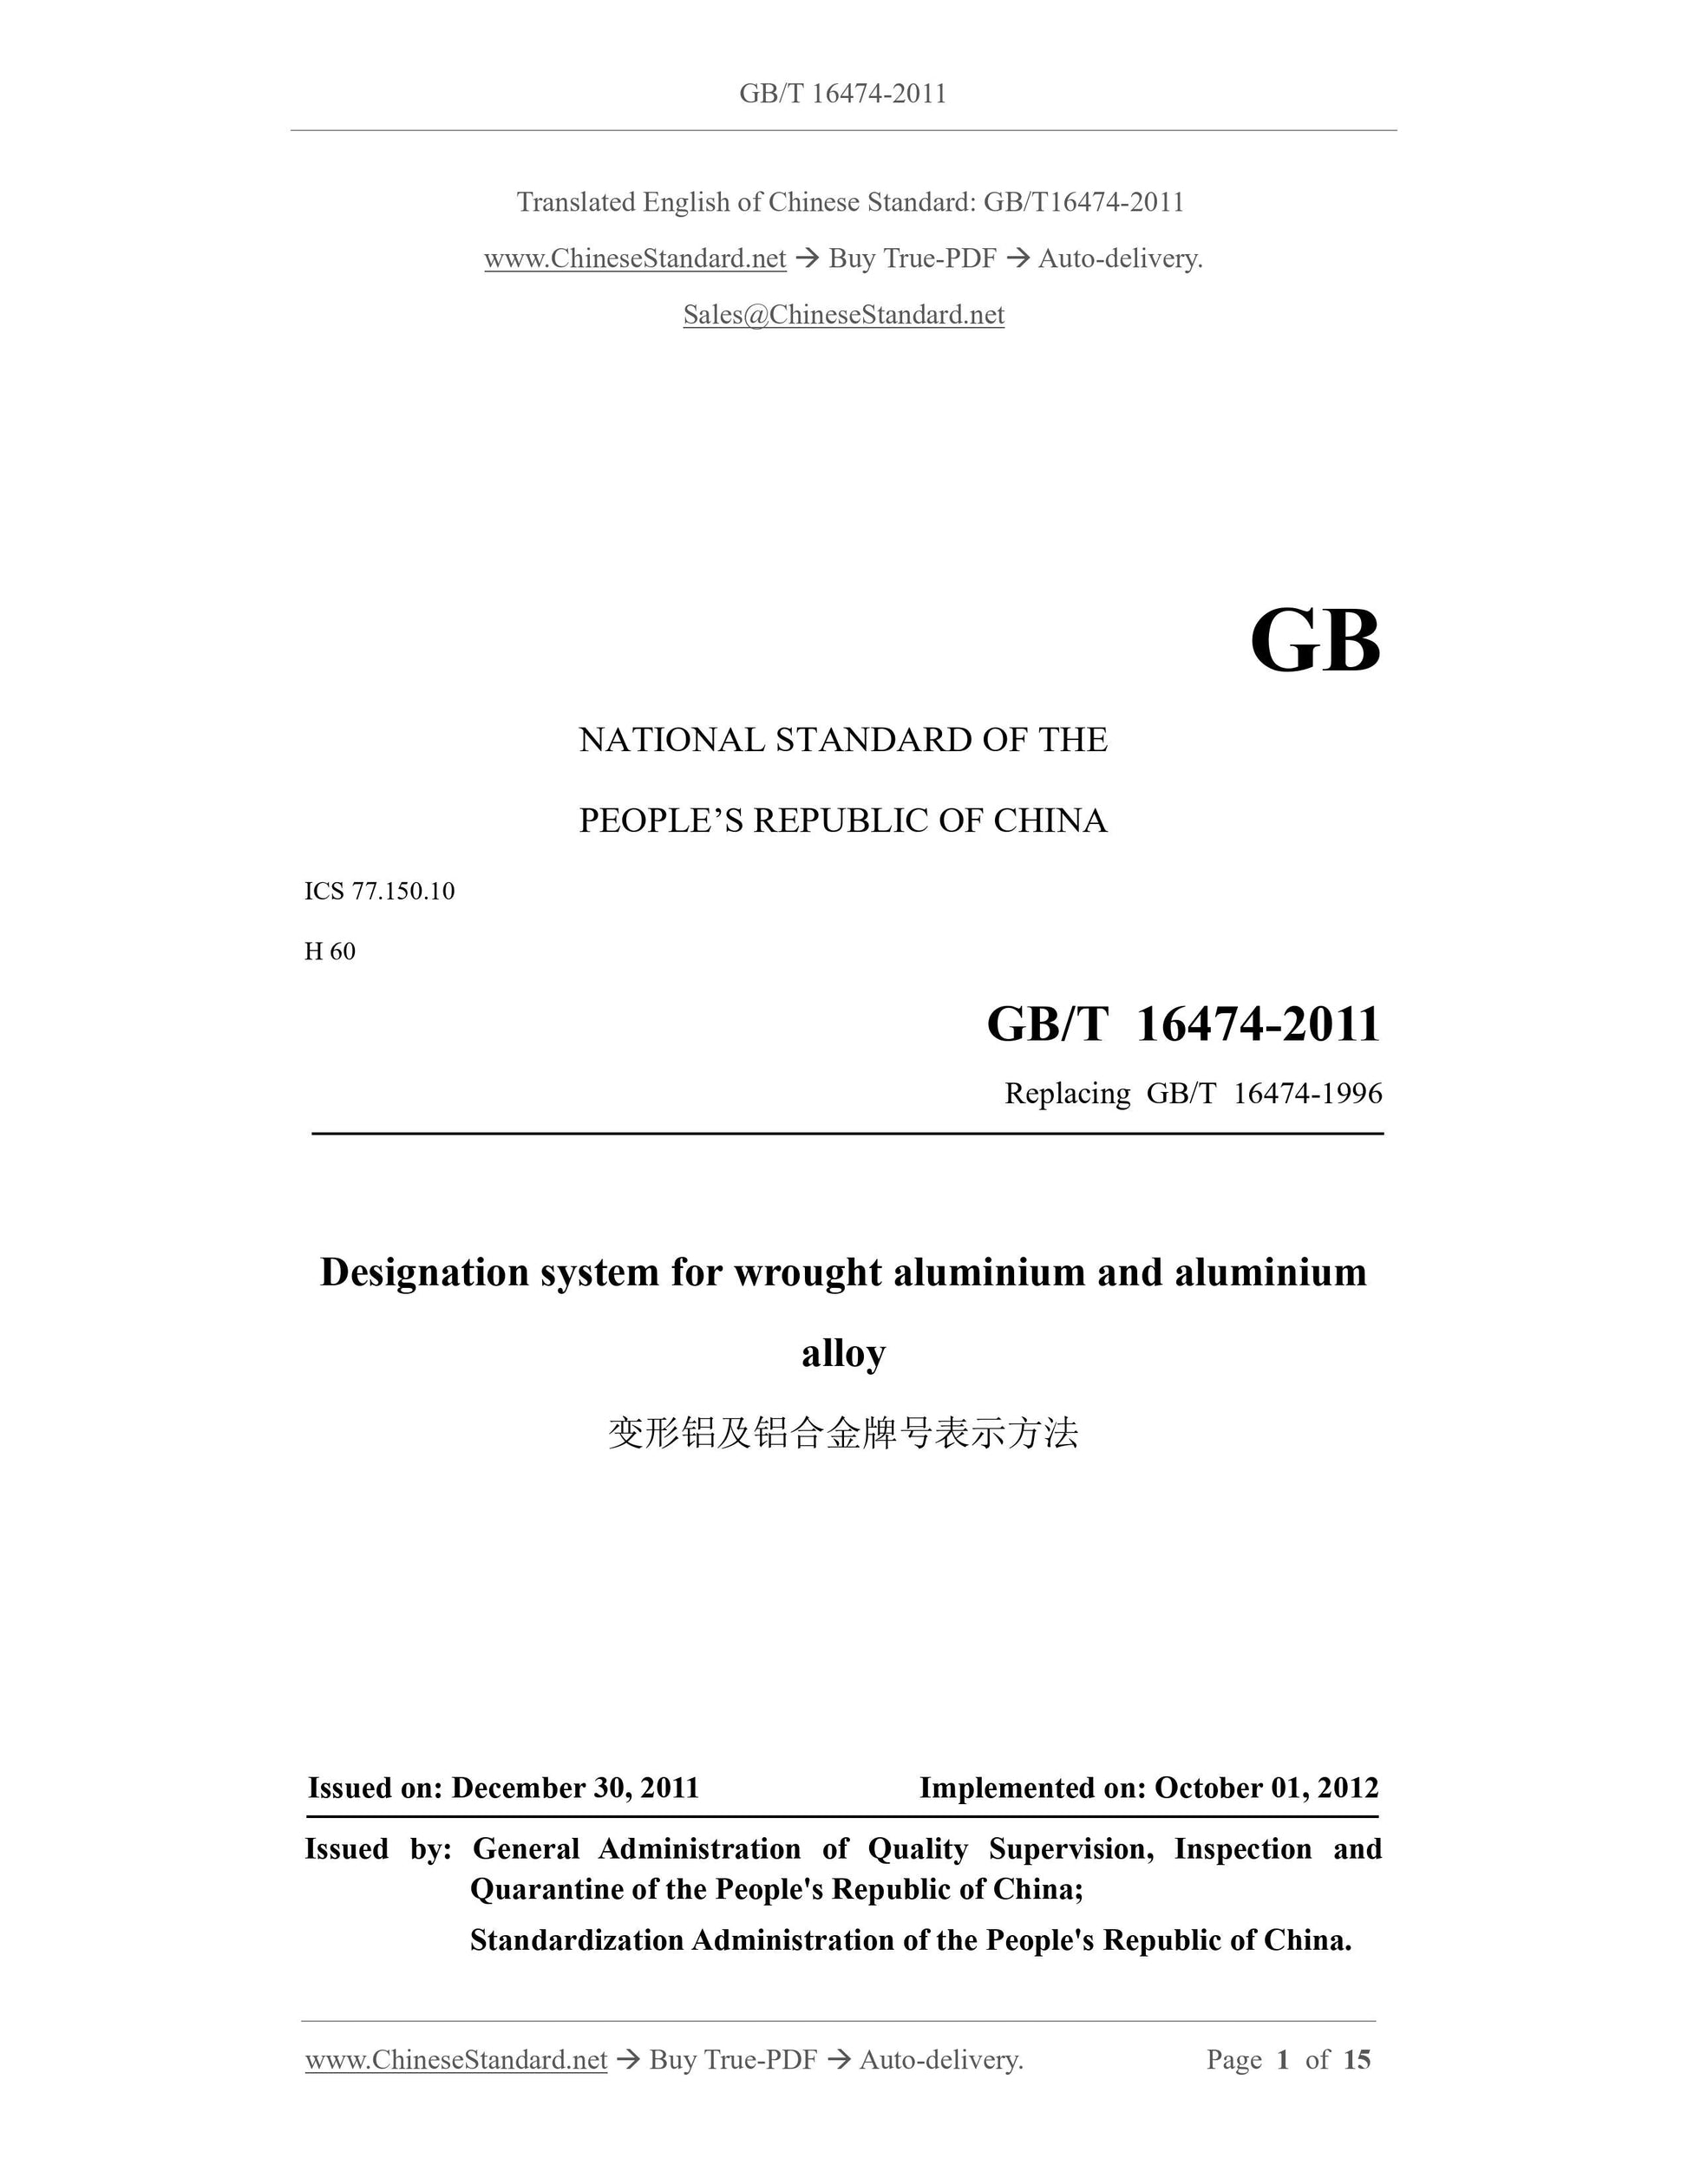 GB/T 16474-2011 Page 1